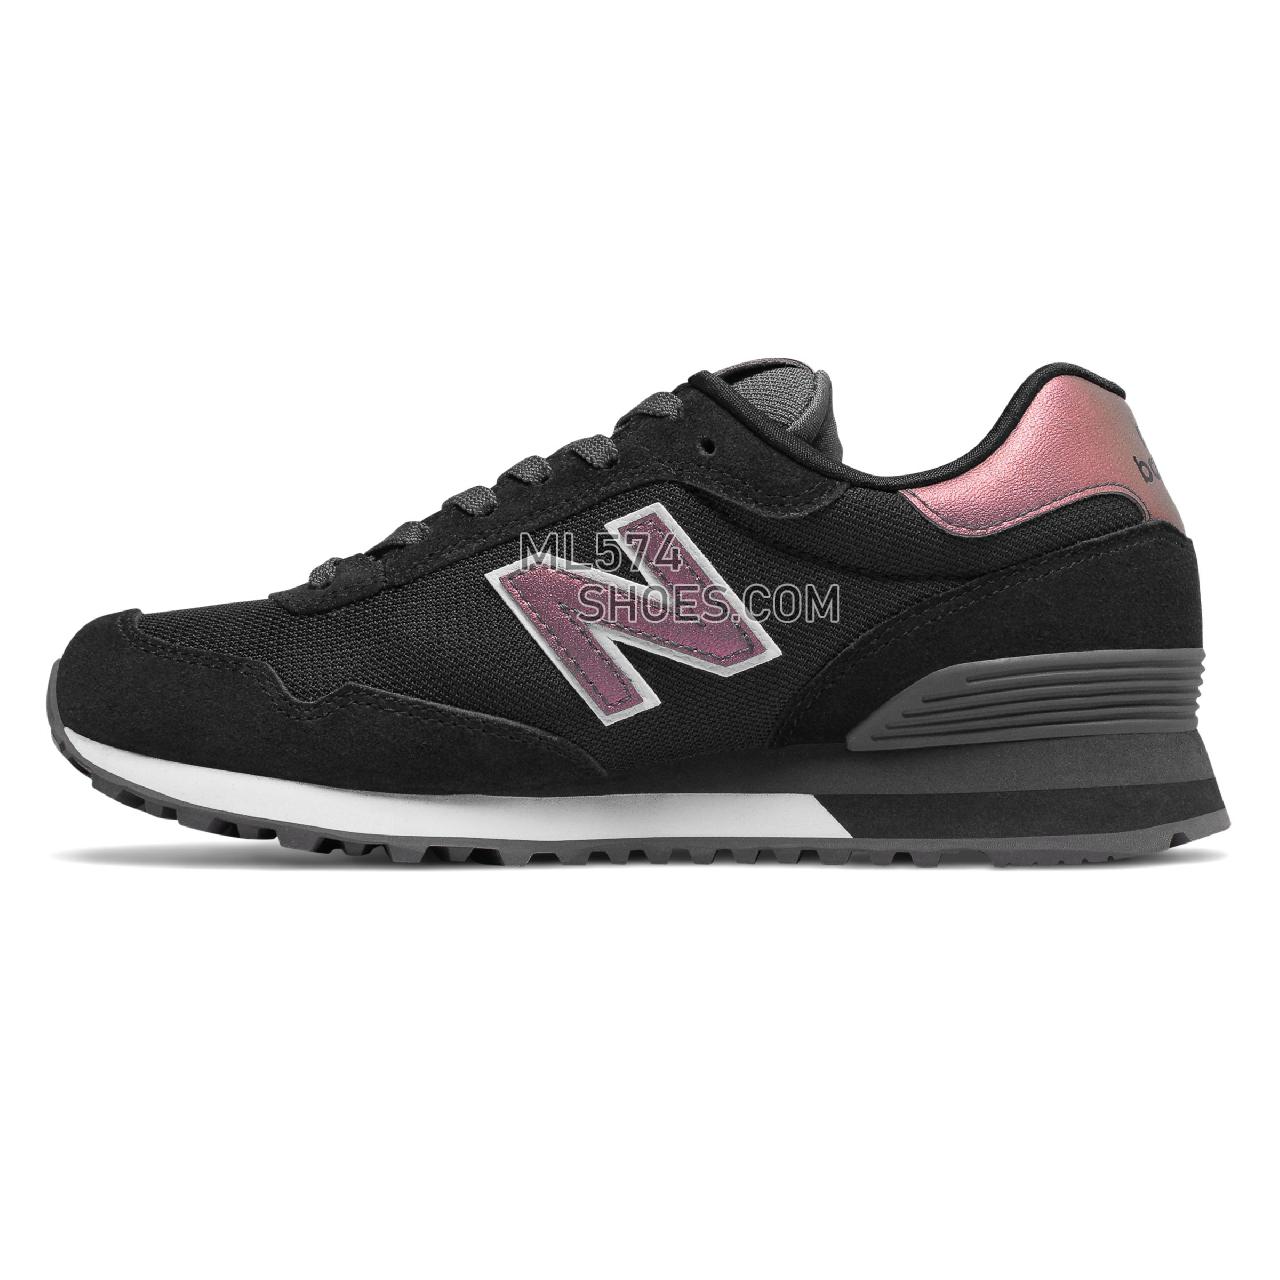 New Balance 515 Classic - Women's Classic Sneakers - Black with Magnet - WL515CSD